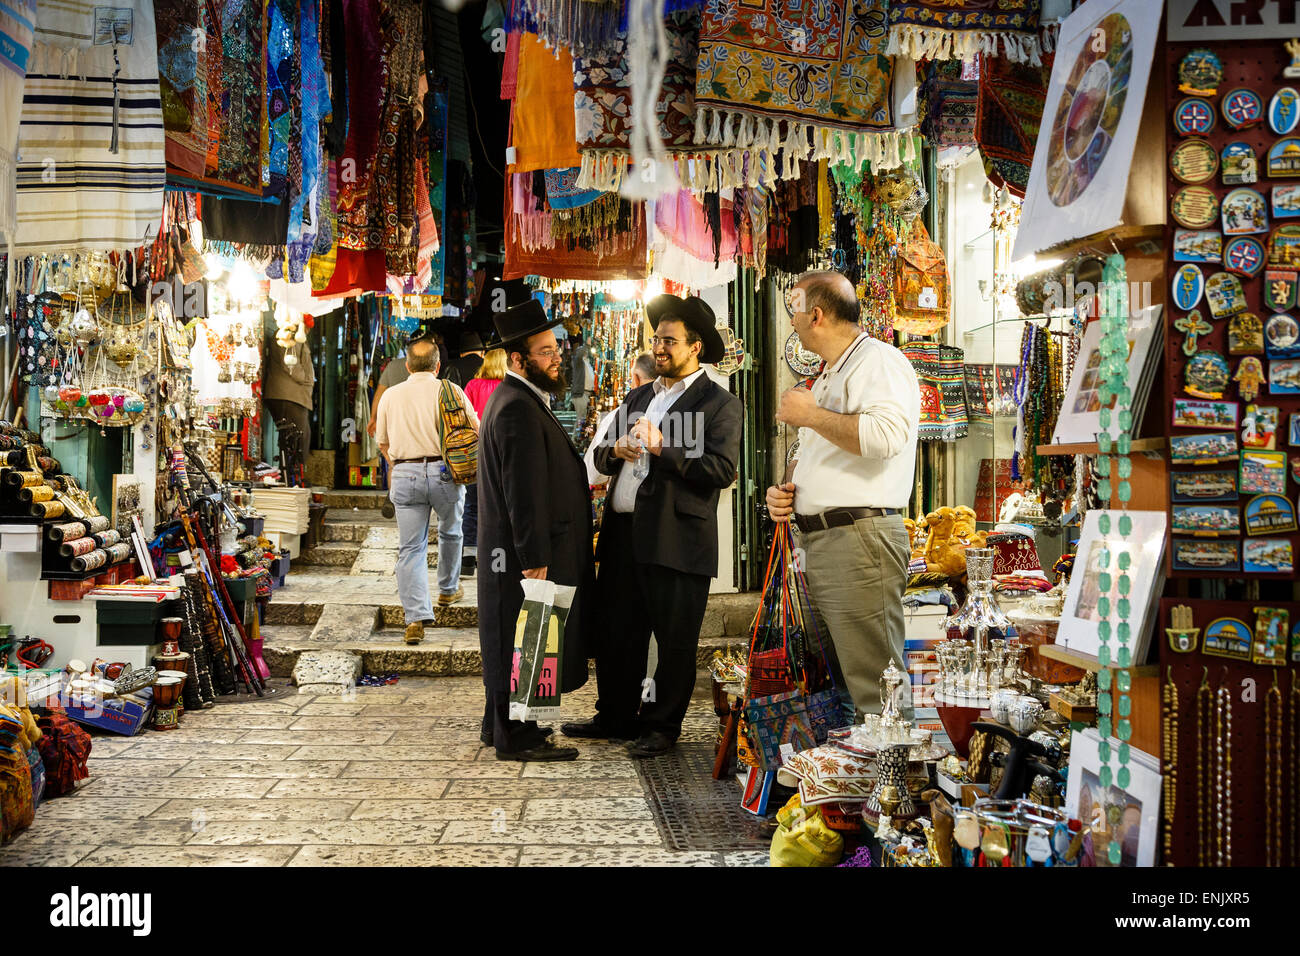 Street with shops in the Muslim Quarter of the Old City, Jerusalem, Israel, Middle East Stock Photo